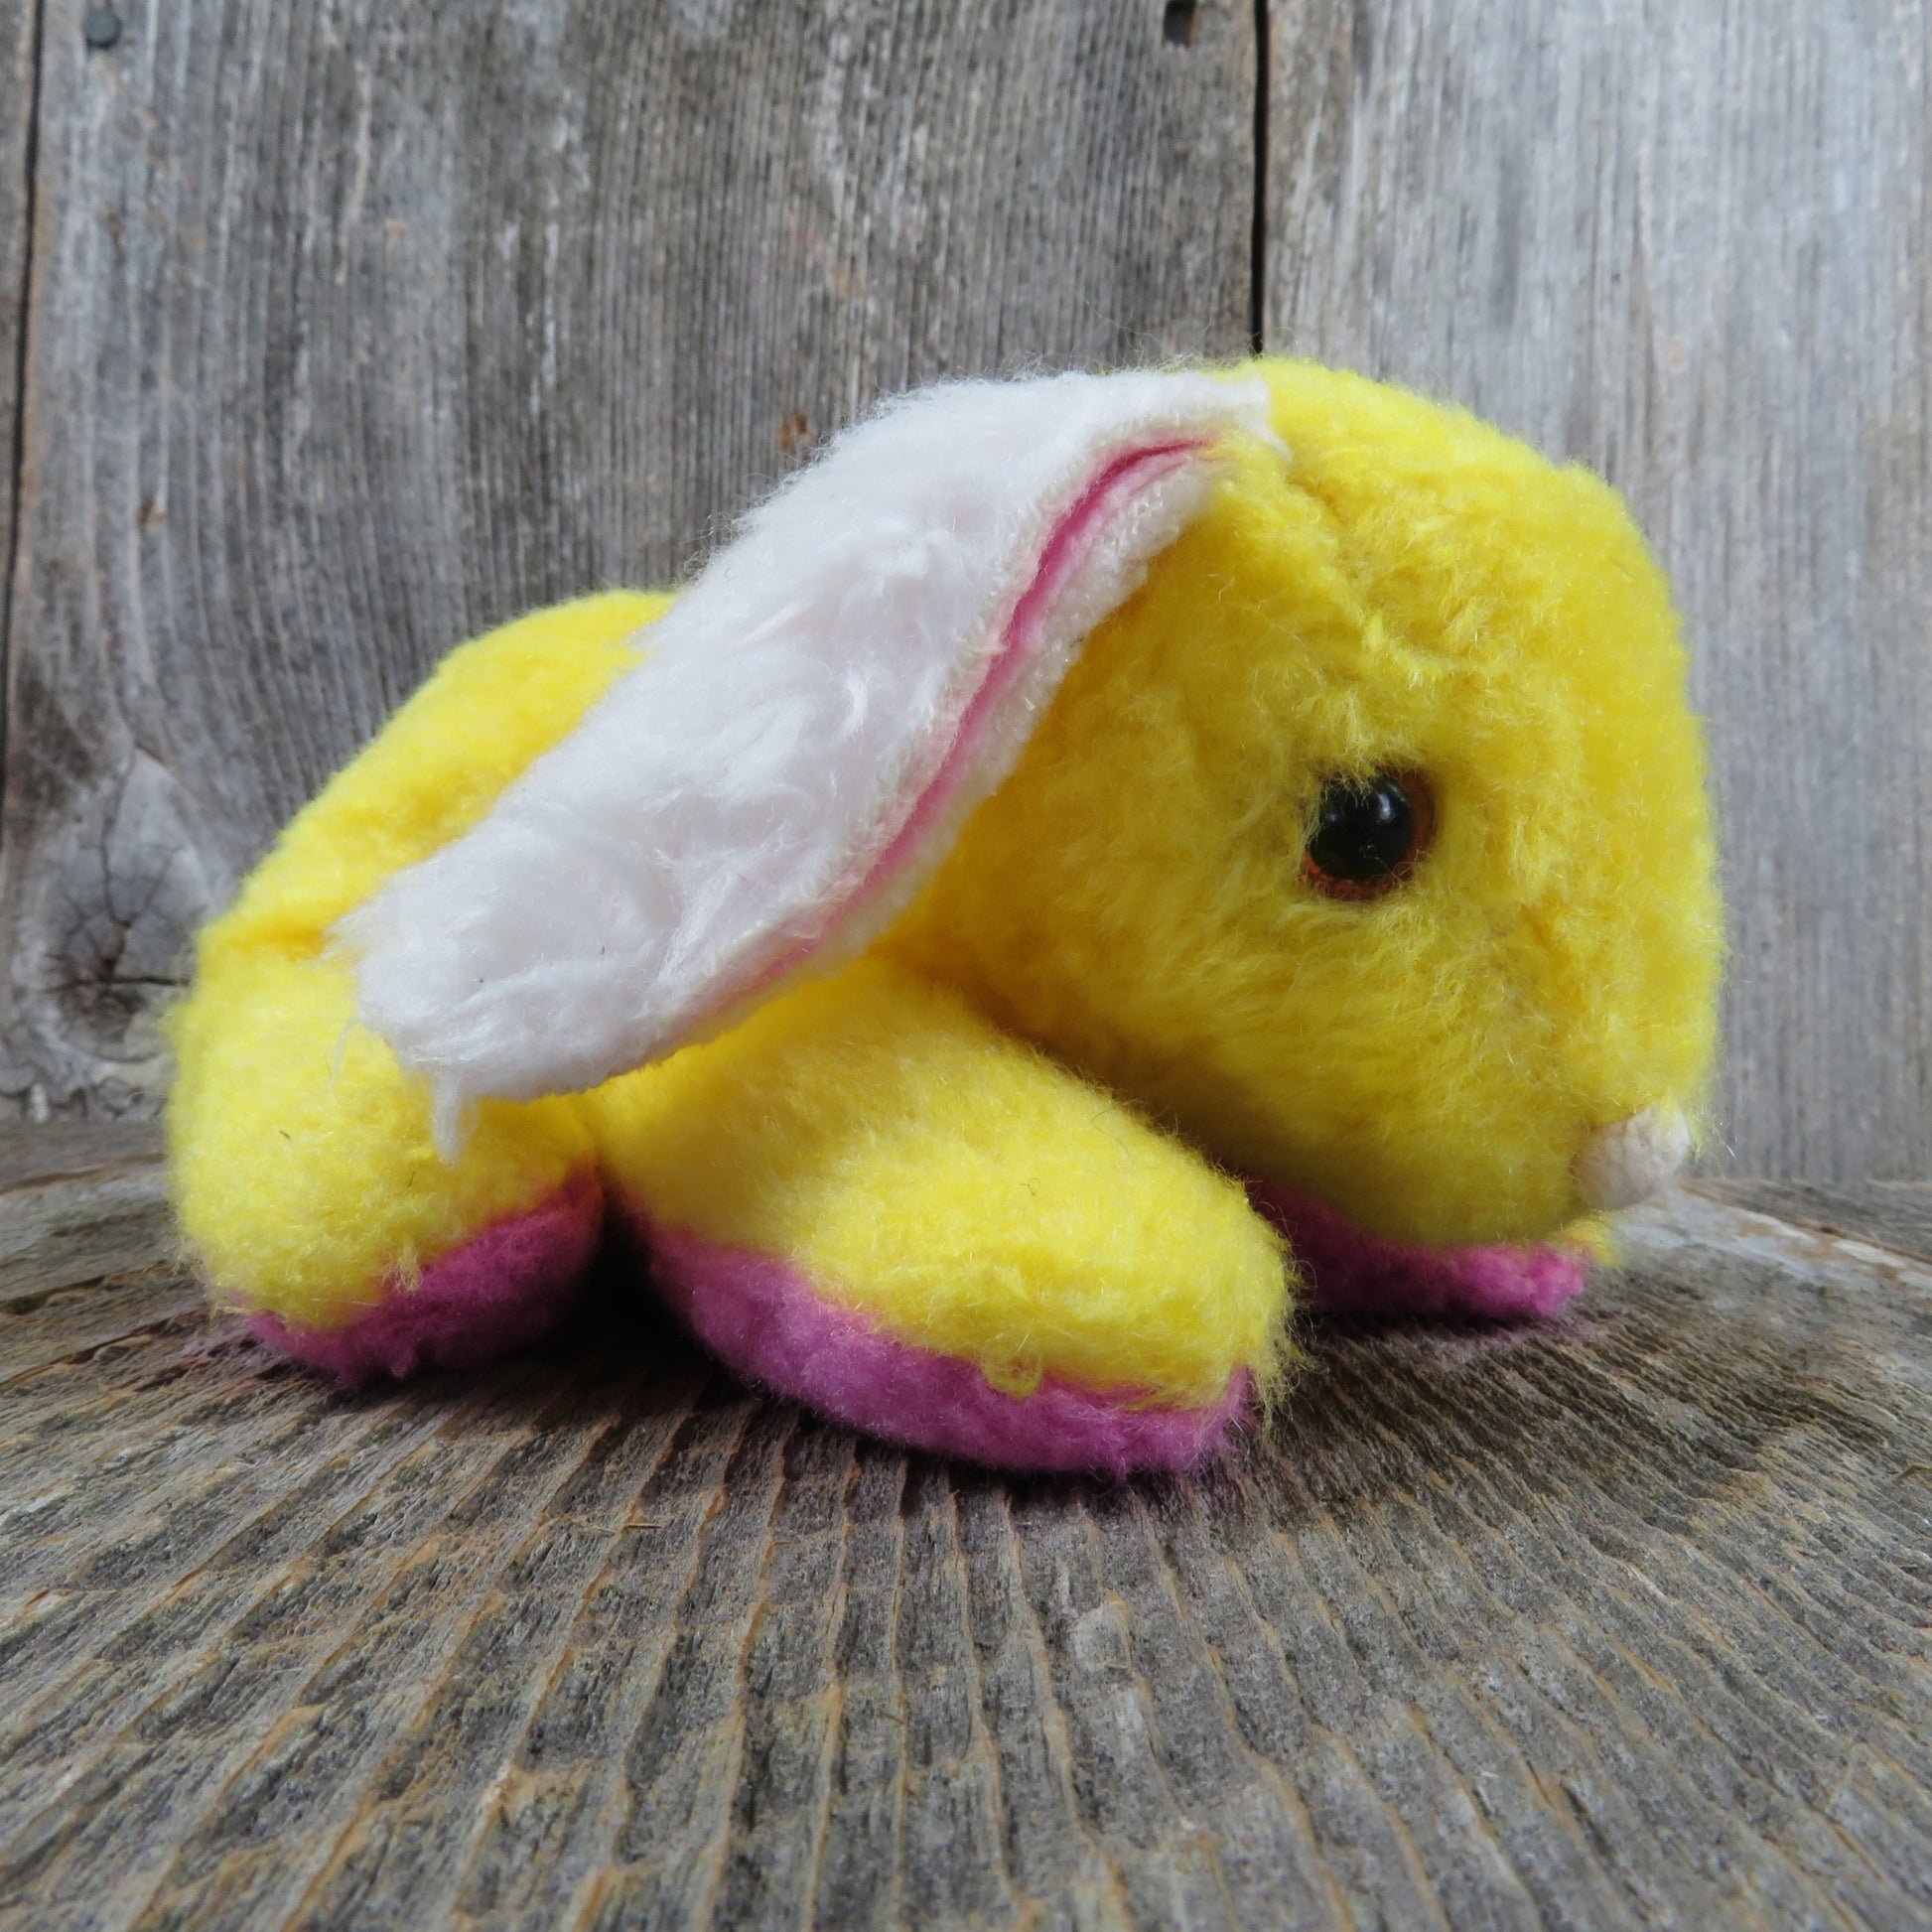 Vintage Bunny Plush Yellow Stuffed Animal Rabbit 1976 Russ Fuzzy Wuzzy Easter Pink Gravel Filled - At Grandma's Table